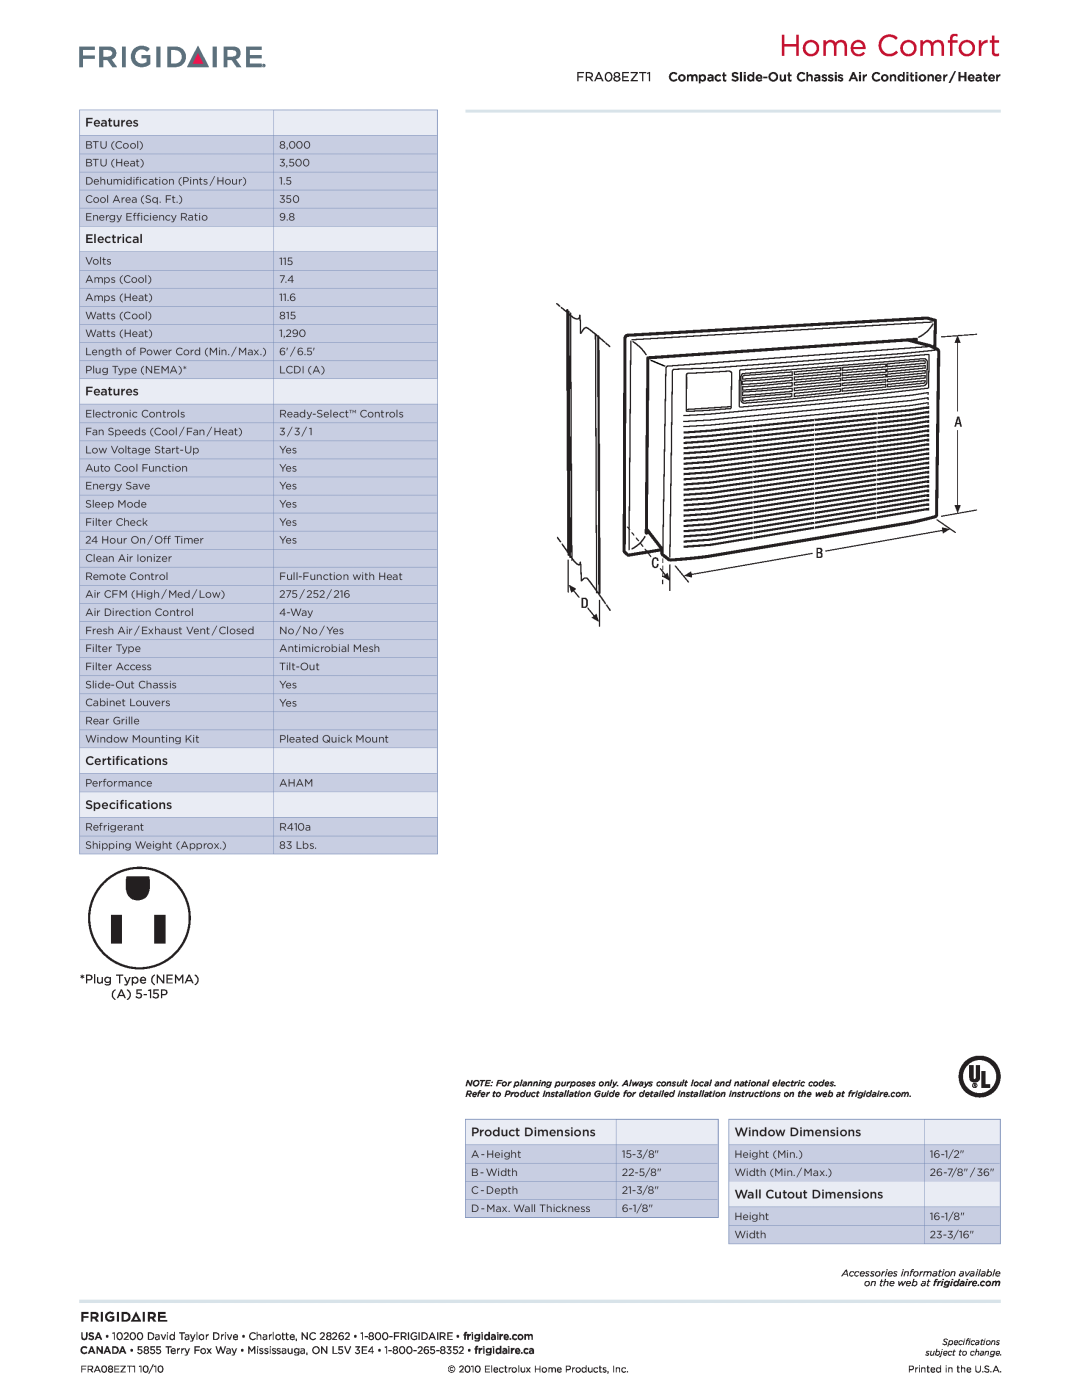 Frigidaire dimensions Home Comfort, FRA08EZT1 Compact Slide-Out Chassis Air Conditioner / Heater 